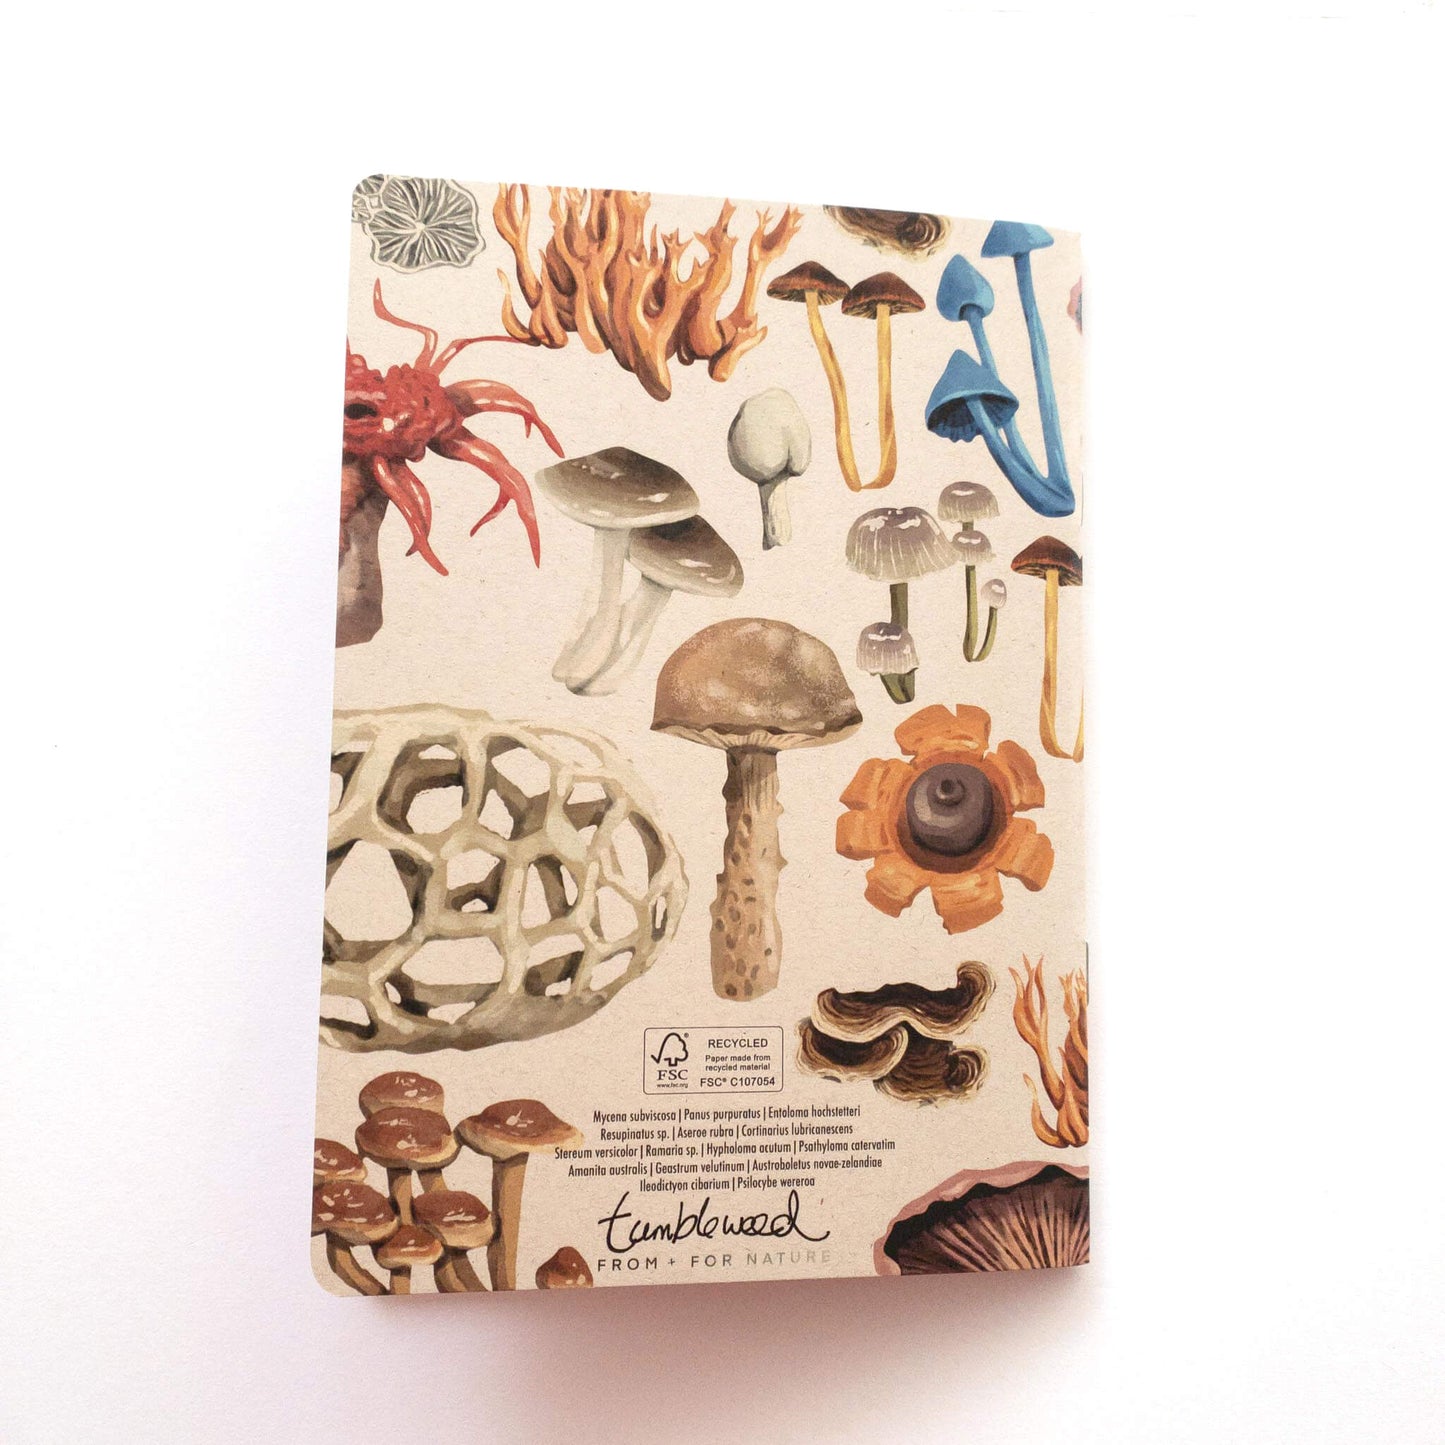 Painted Fungi Notebook